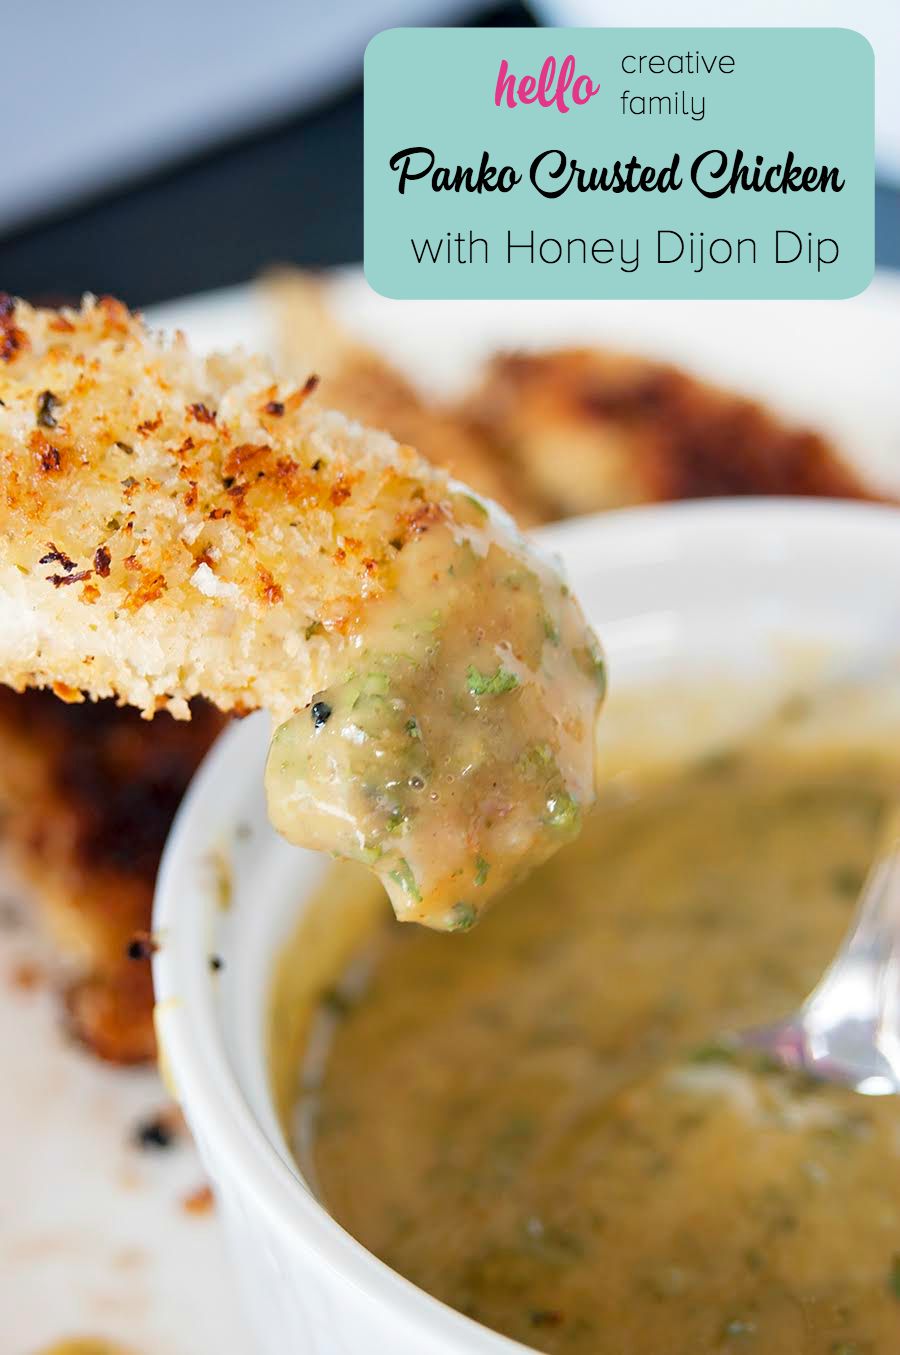 Kid tested, mom approved! This panko crusted chicken fingers recipe is a healthier, crunchy version of every kid's favorite restaurant meal. Pair it with our honey dijon dip and mom and dad will be dipping away too! An easy, weeknight less than 30 minute meal! 